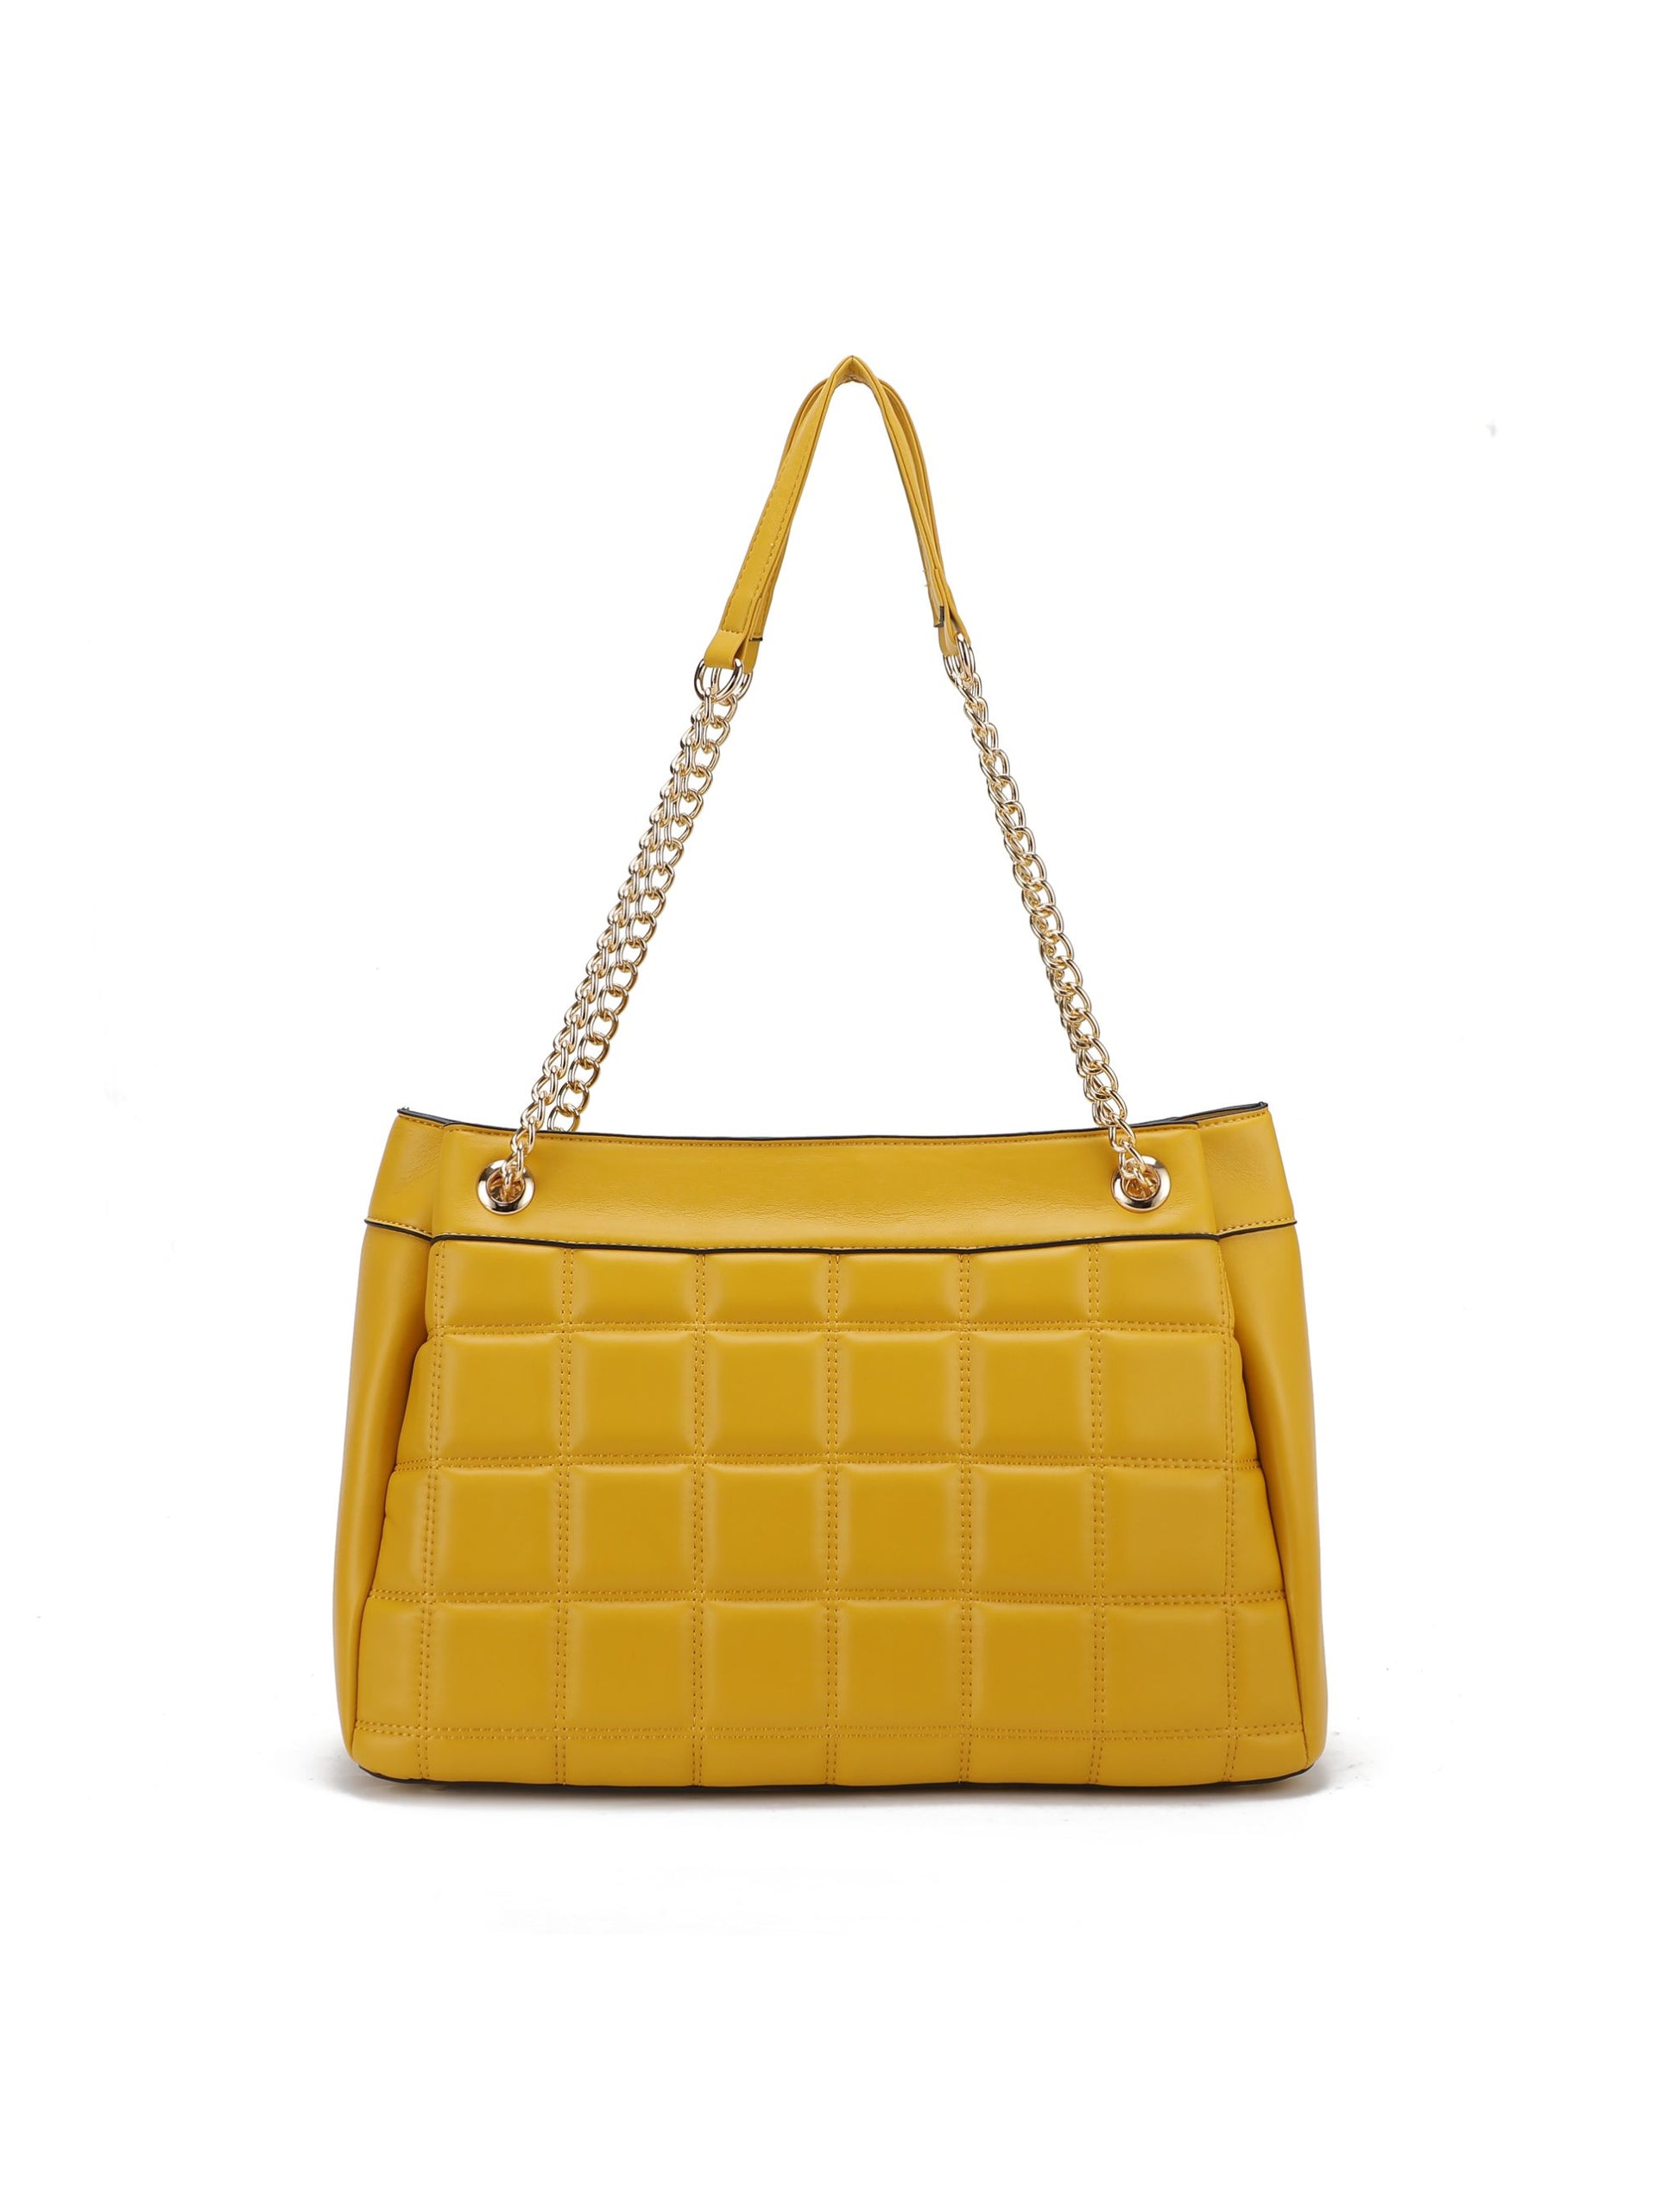 A Yellow Mabel Quilted Vegan Leather Women Shoulder Bag with Bracelet Keychain handbag from Pink Orpheus.